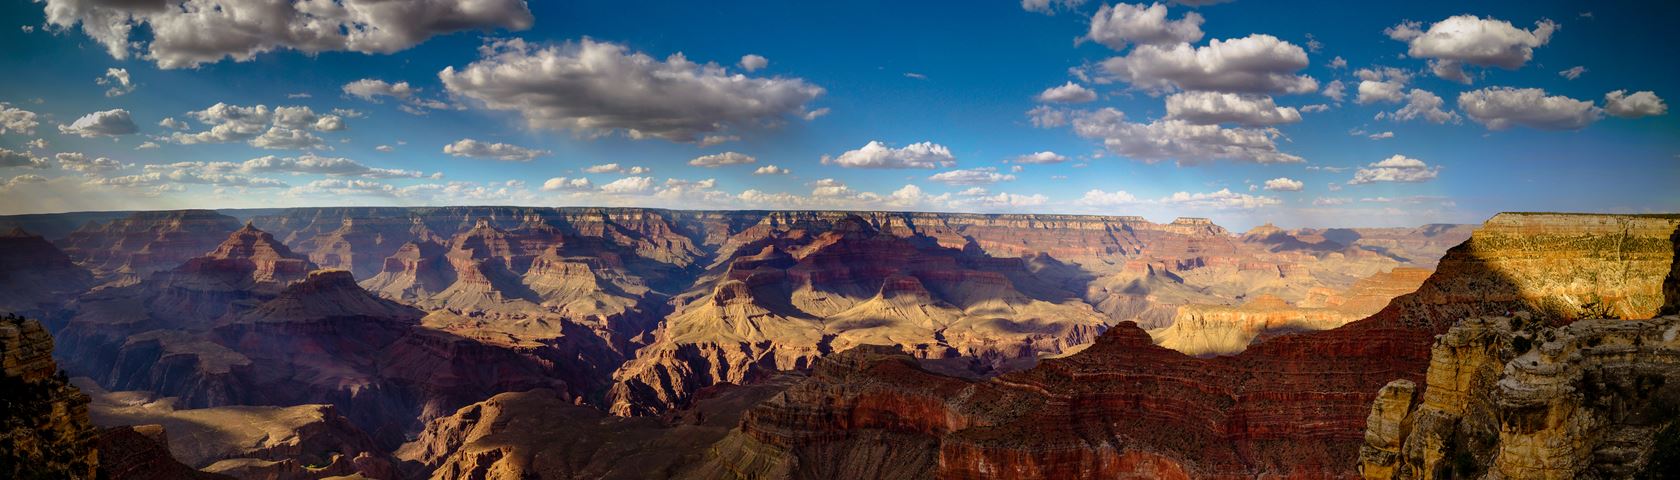 Grand Canyon Overlook Image Wallpaperfusion By Binary